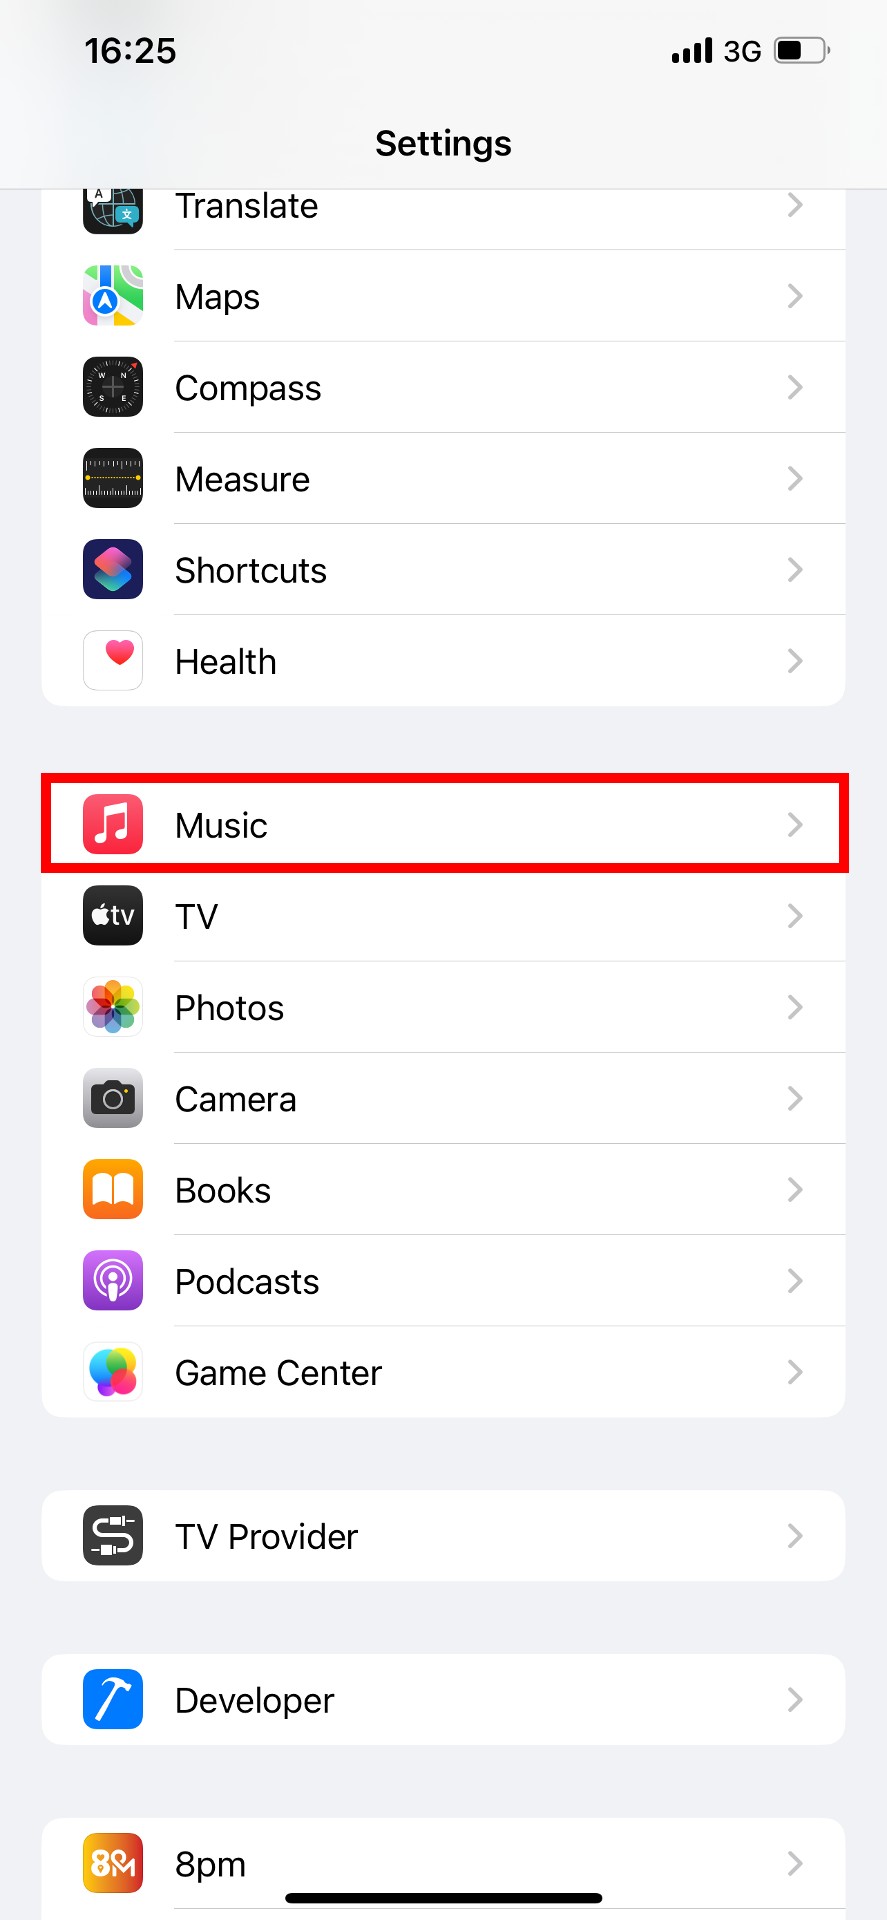 iOS settings with "Music" highlighted